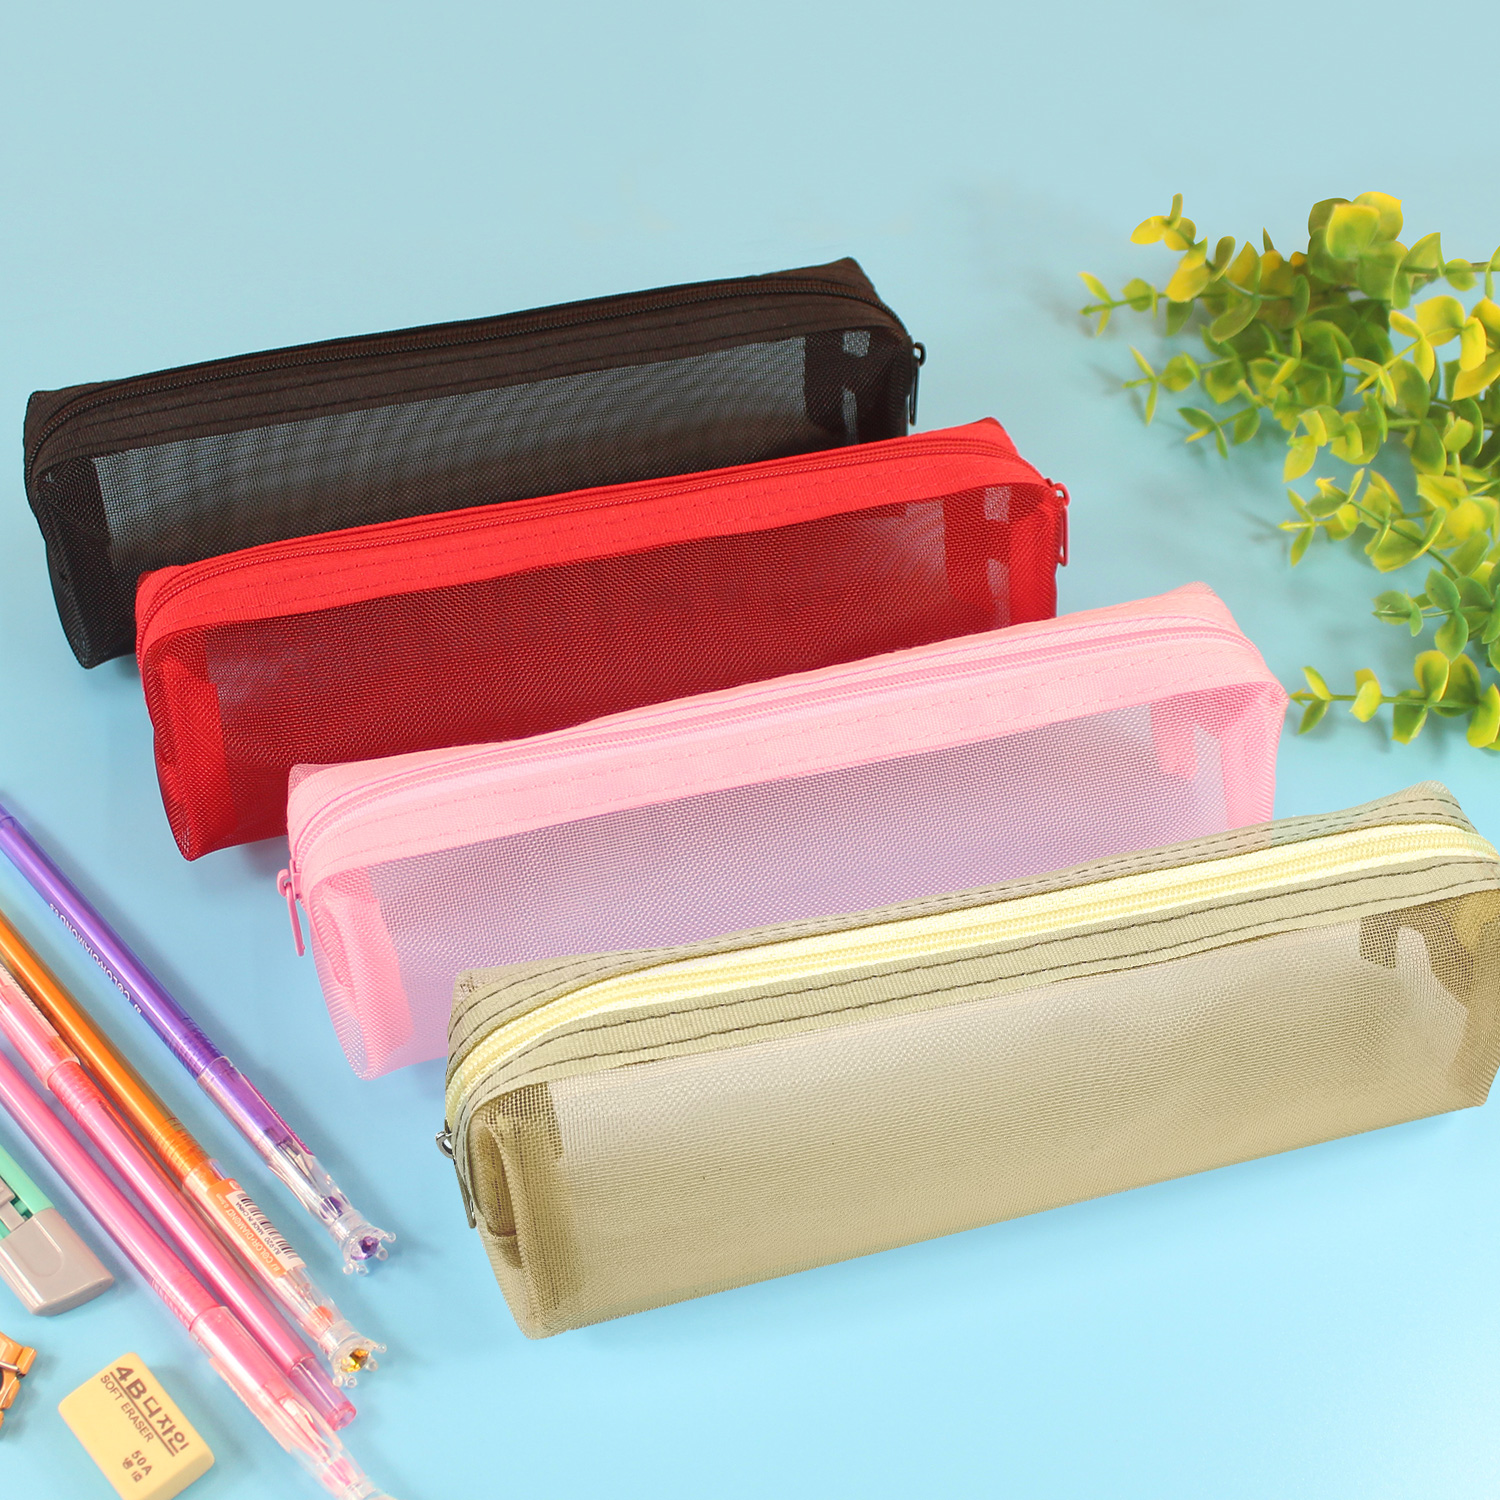 Translucent simple poly pencil pouch organizer case handbag with zipper closure all-in-one a range of color available cosmetic bag for all ages for business office school daily use for men women China OEM factory